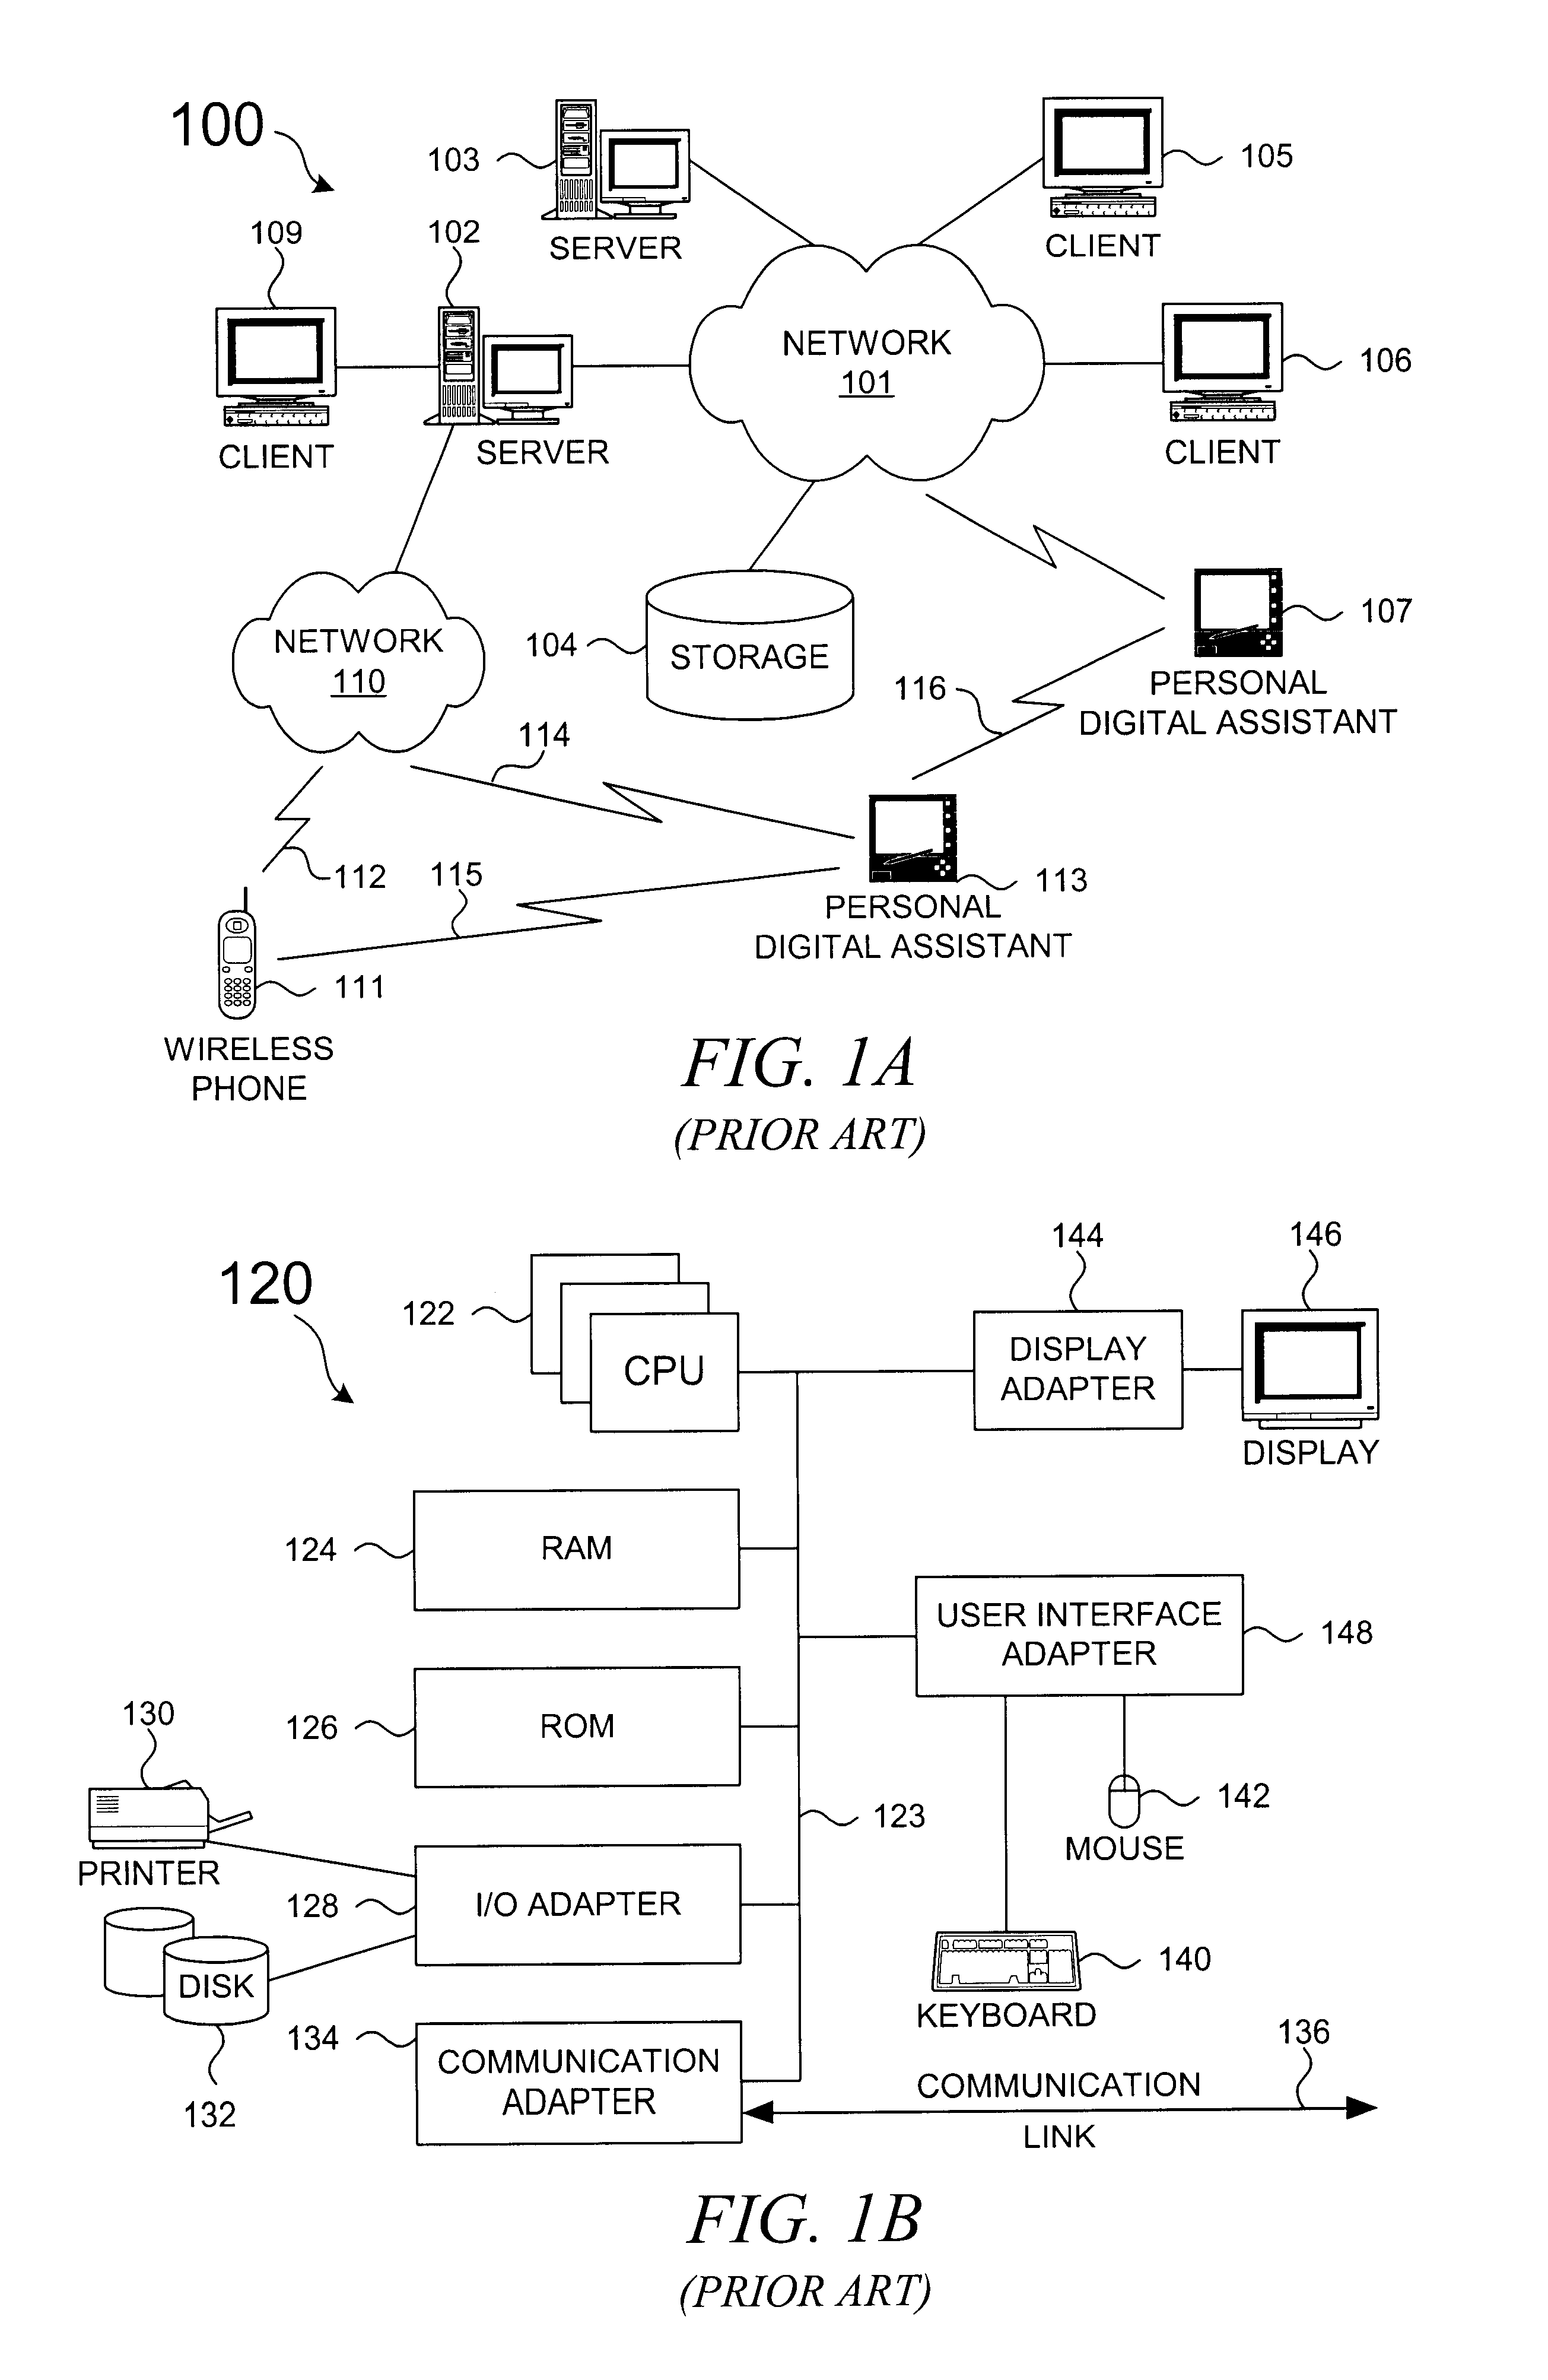 Method and system in electronic commerce for inspection-service-based release of escrowed payments